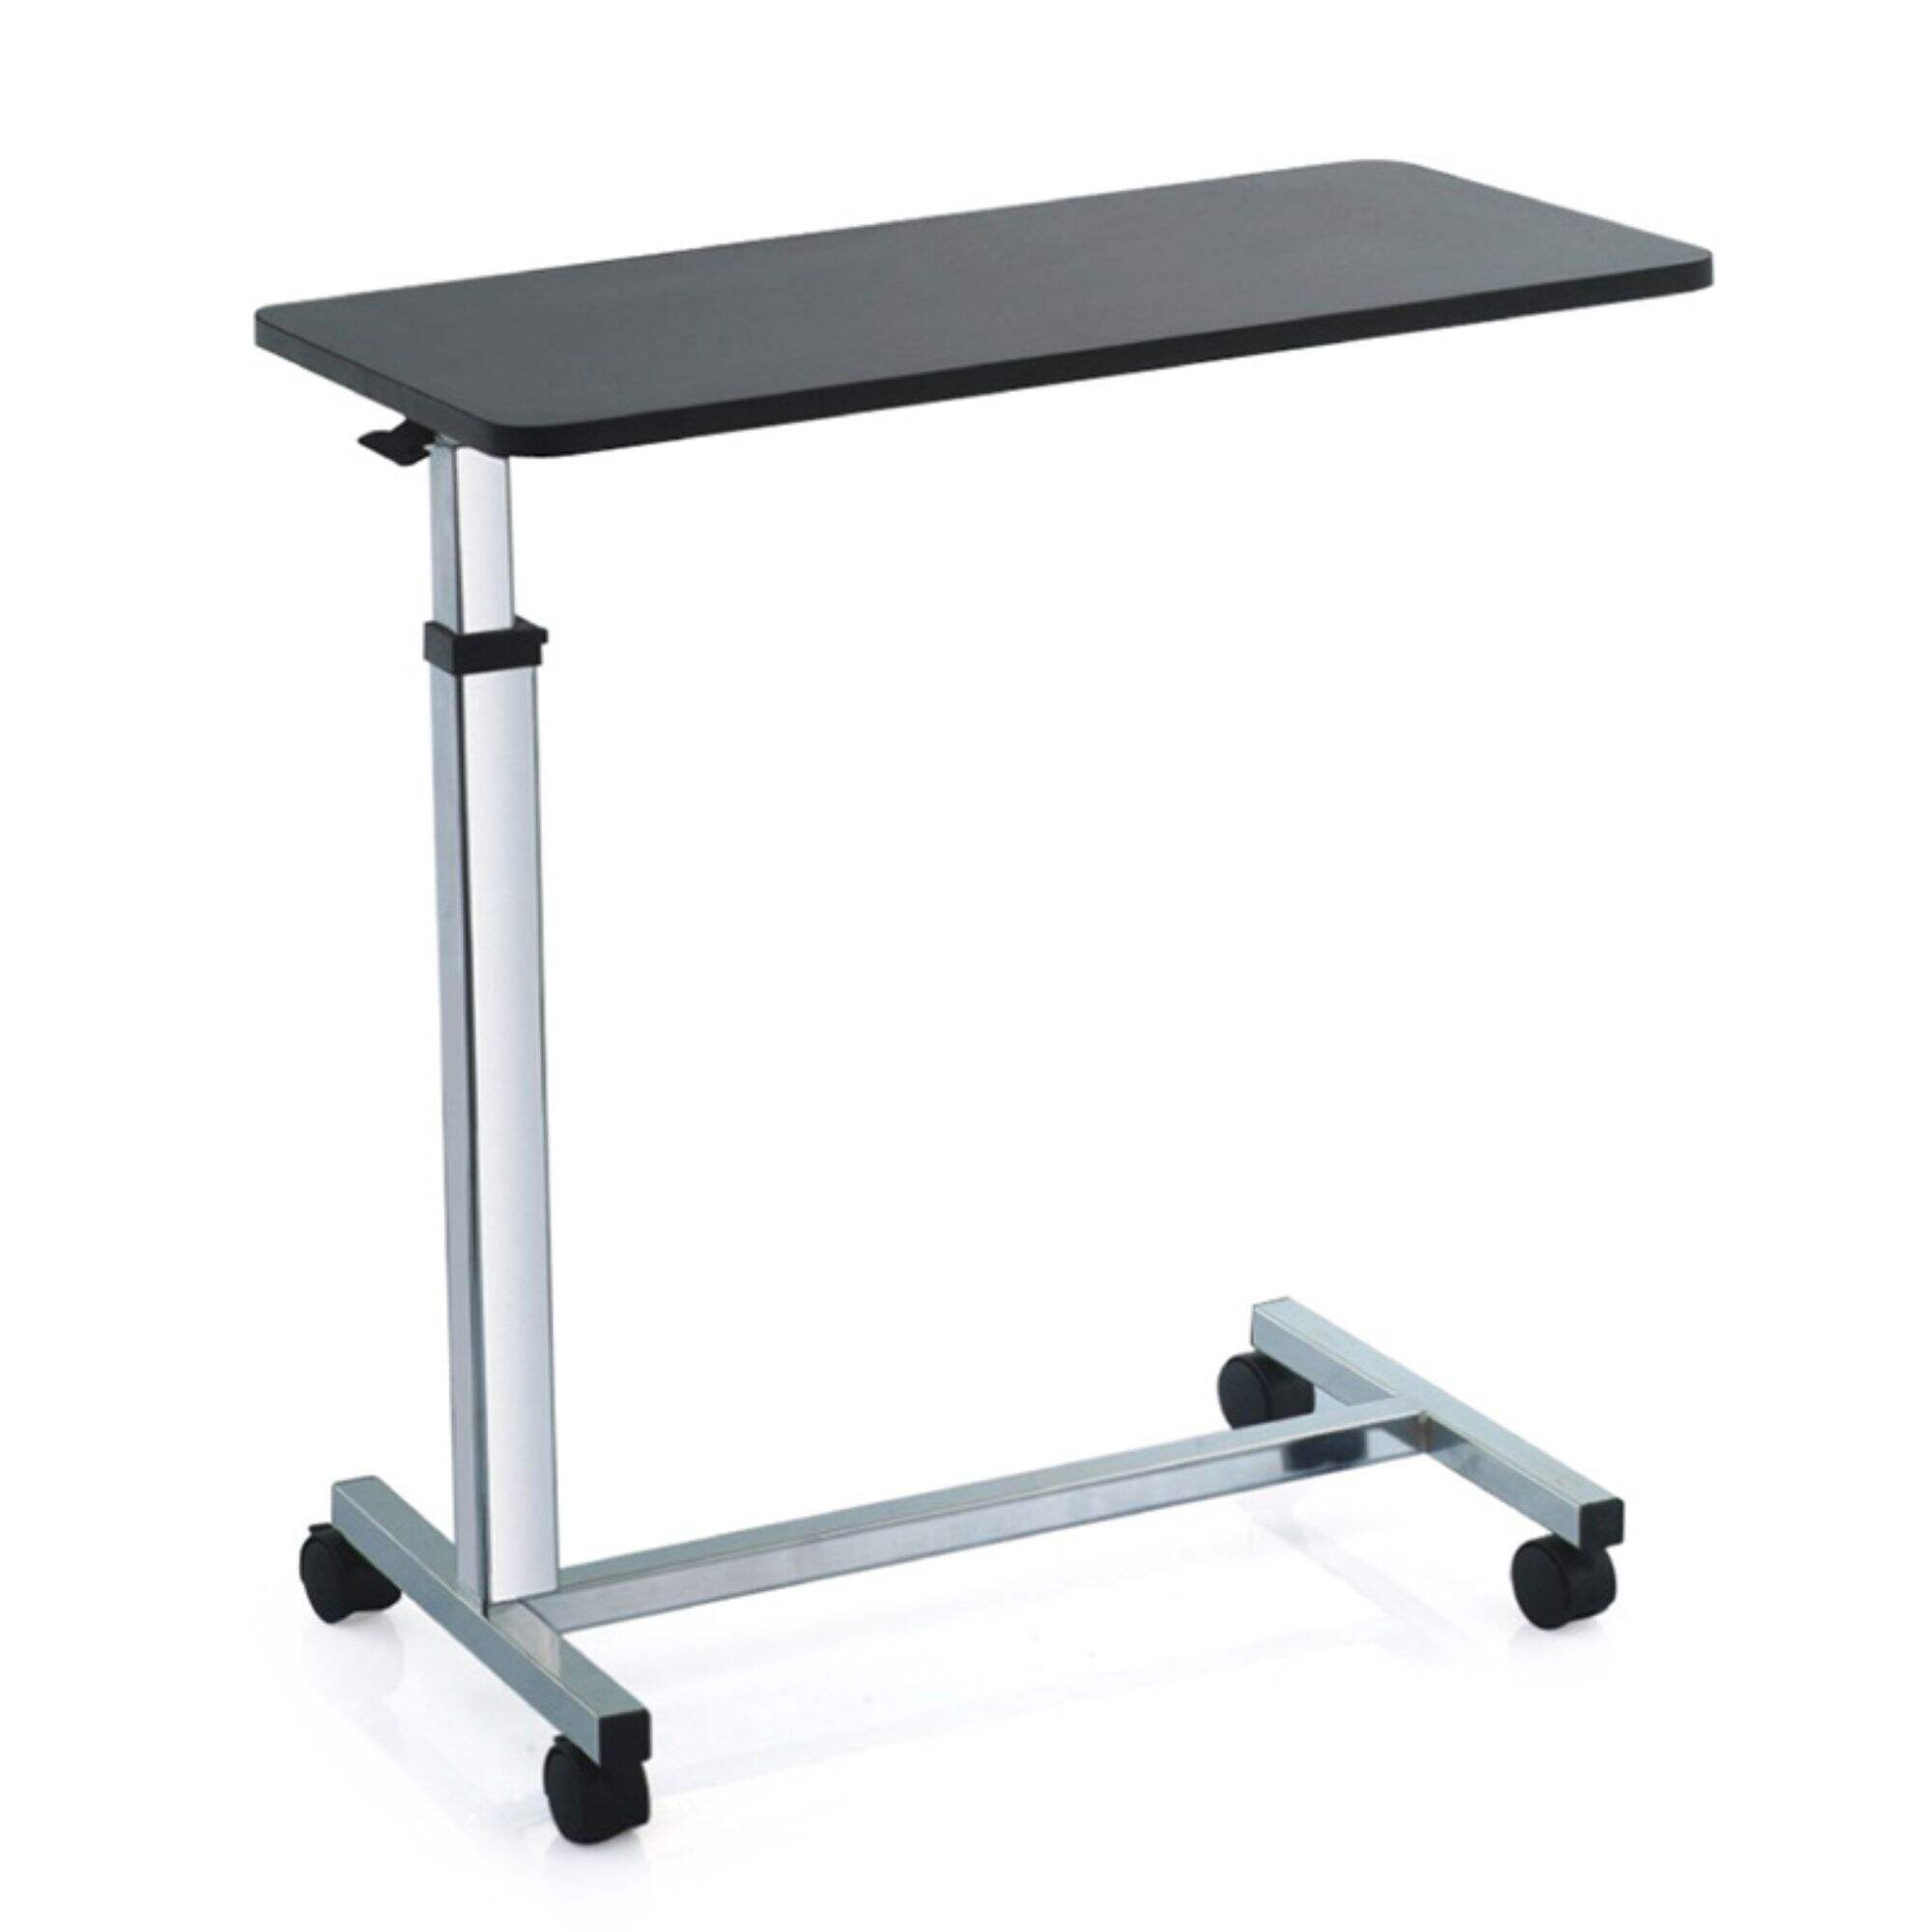 YFT005 Overbed Table